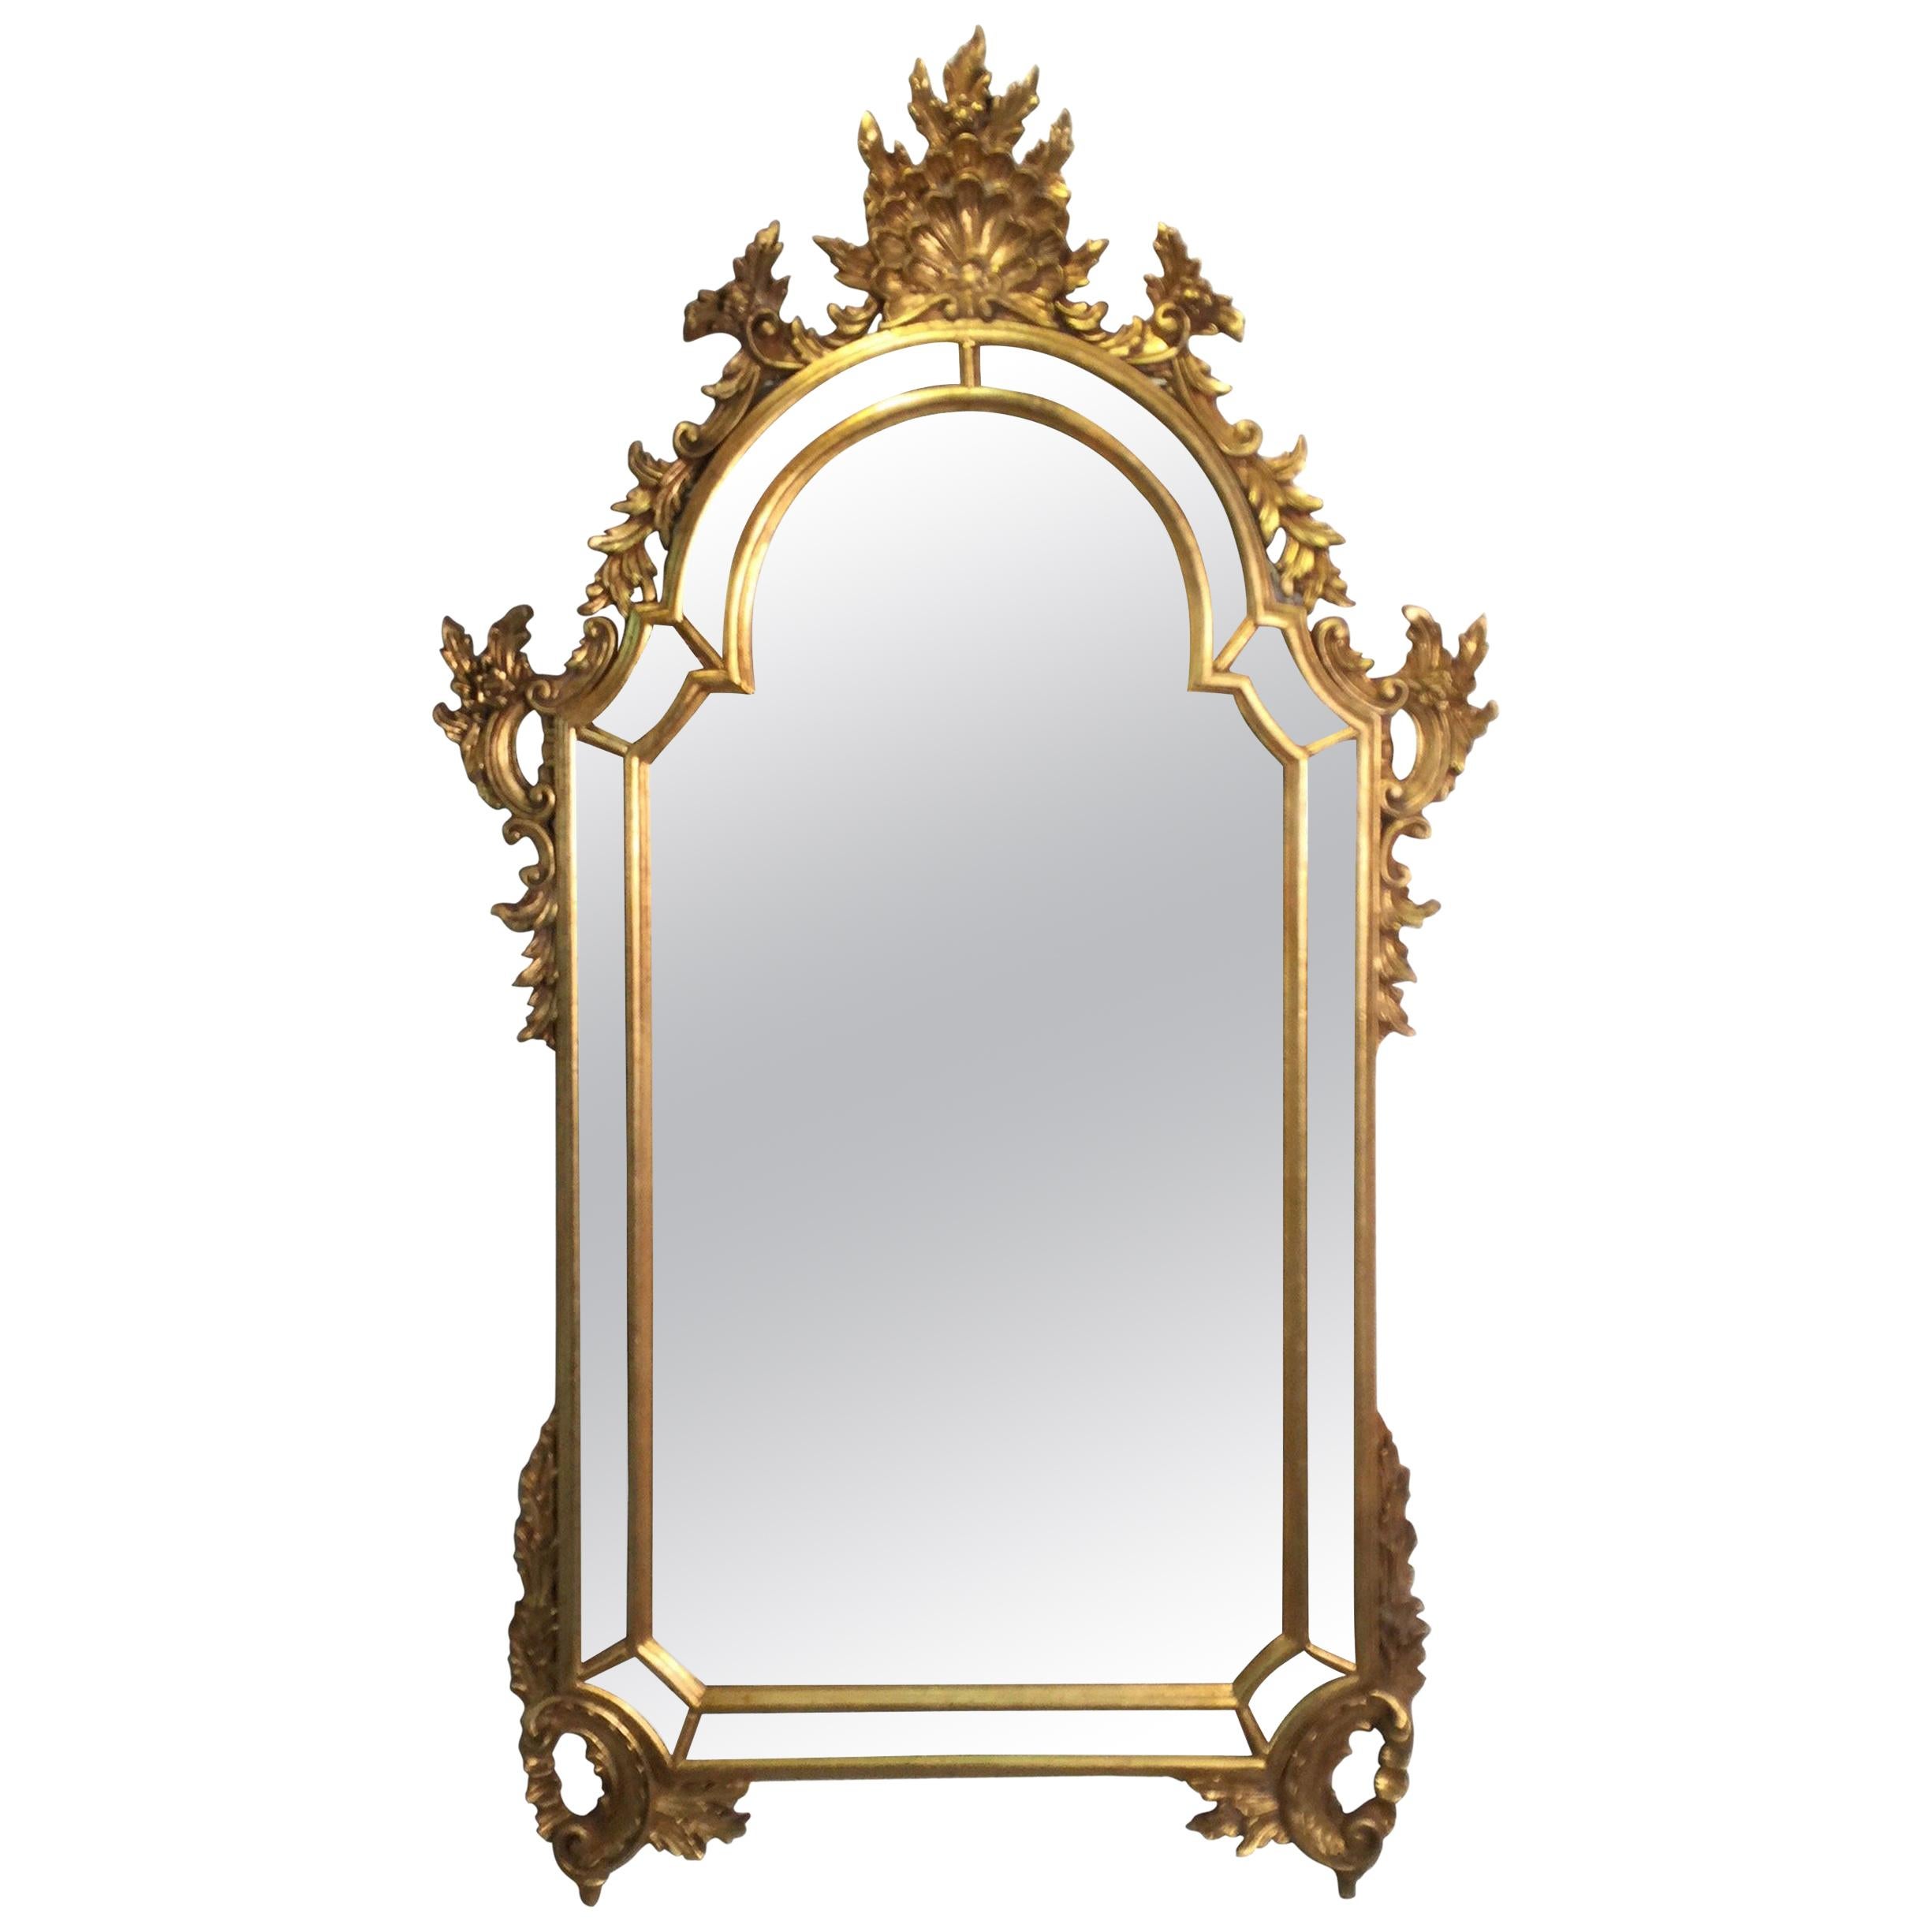 Carved Gold Giltwood Venetian Mirror Made in Italy by La Barge